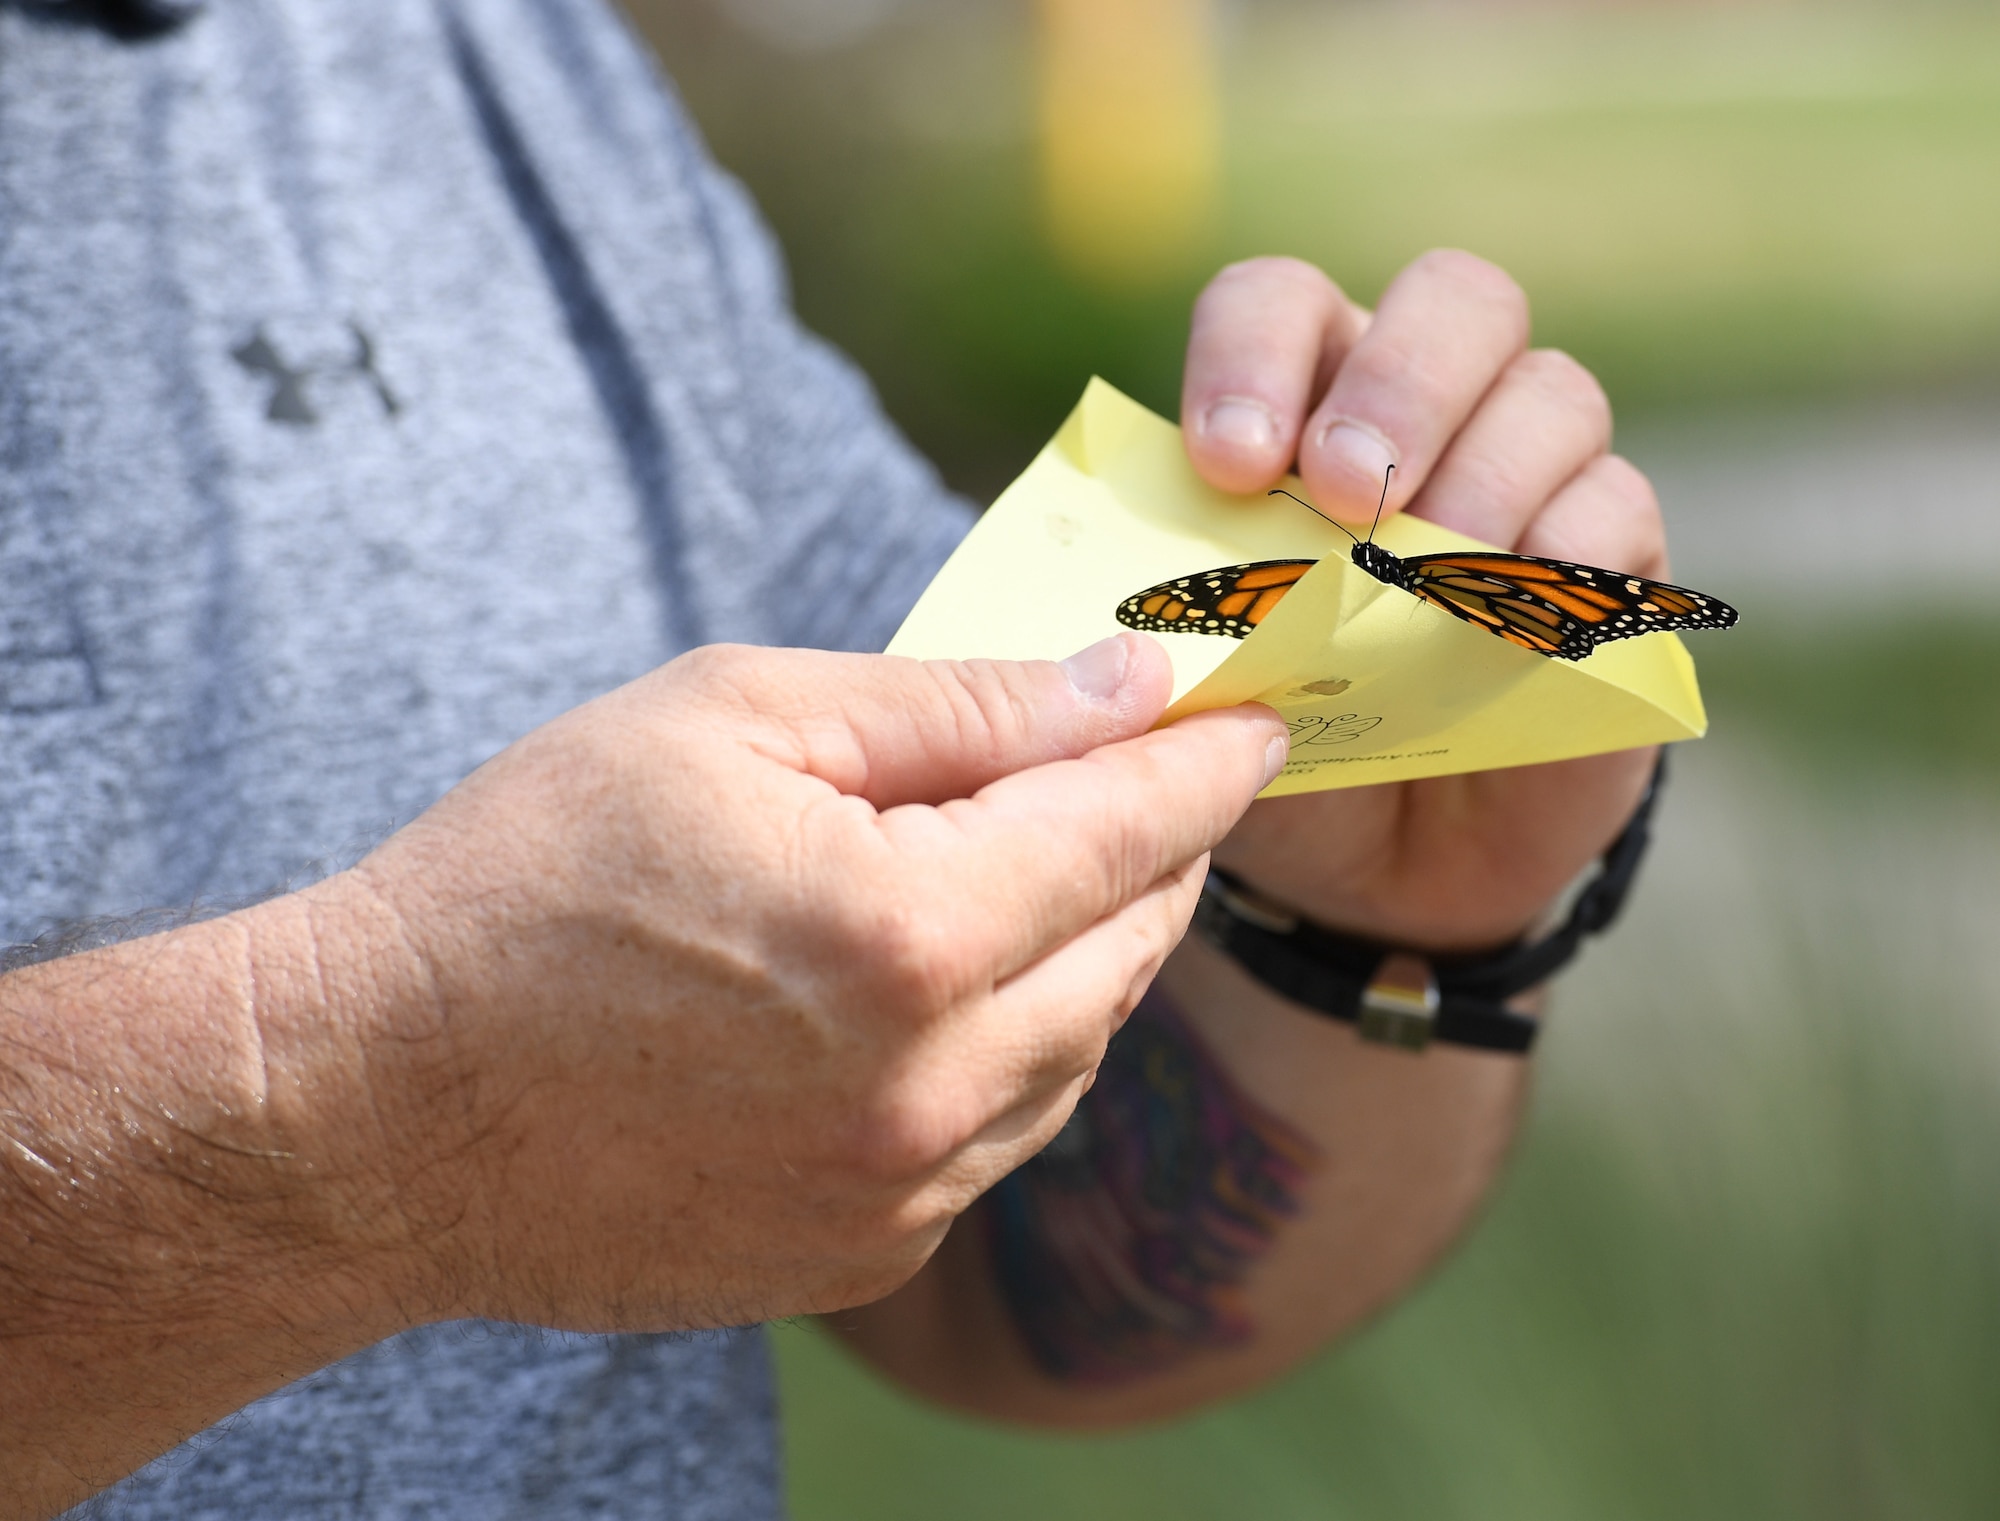 Mike Bradford releases a butterfly in memory of his son, U.S. Air Force Airman 1st Class Brian Bradford, during the Butterfly Release Ceremony honoring Keesler's Fallen Heroes at the Marina at Keesler Air Force Base, Mississippi, Sept. 25, 2020. Bradford was killed while deployed Dec. 6, 2018. The event was held in conclusion of Gold Star Family Remembrance Week, which honored the families of fallen service members. (U.S. Air Force photo by Kemberly Groue)